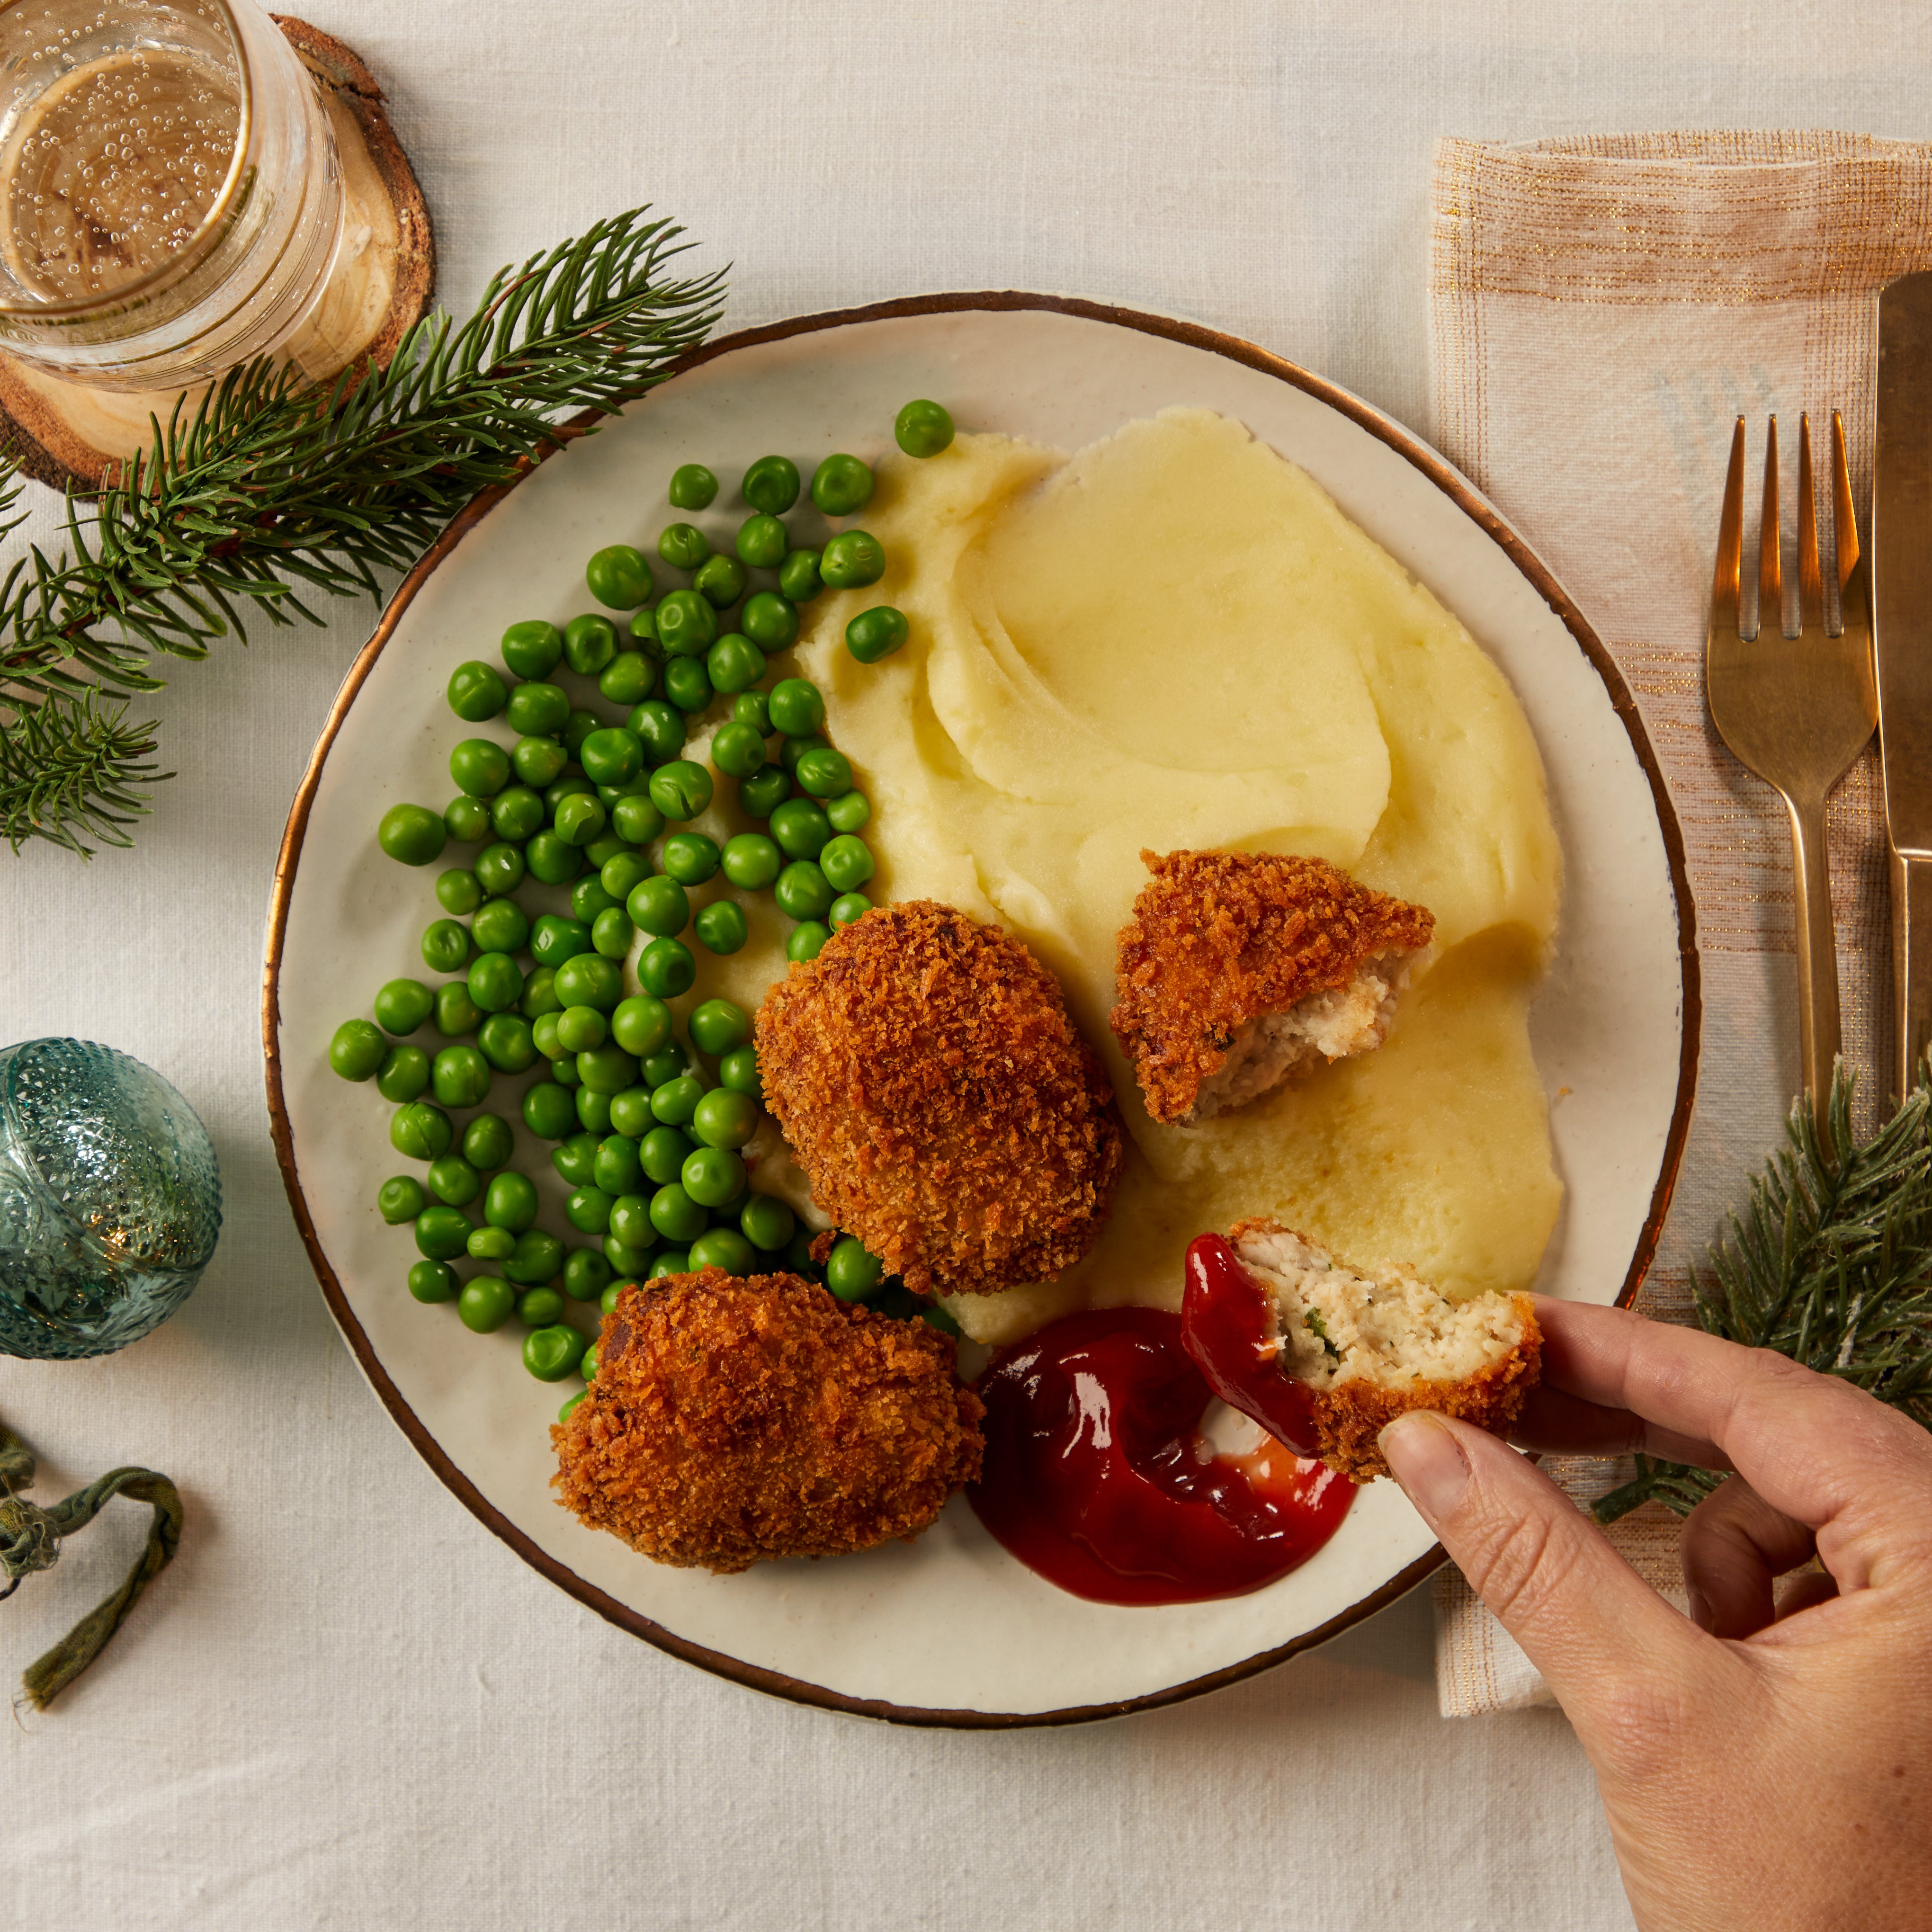 If you can still tolerate turkey after the big day, these nuggets will go down a treat